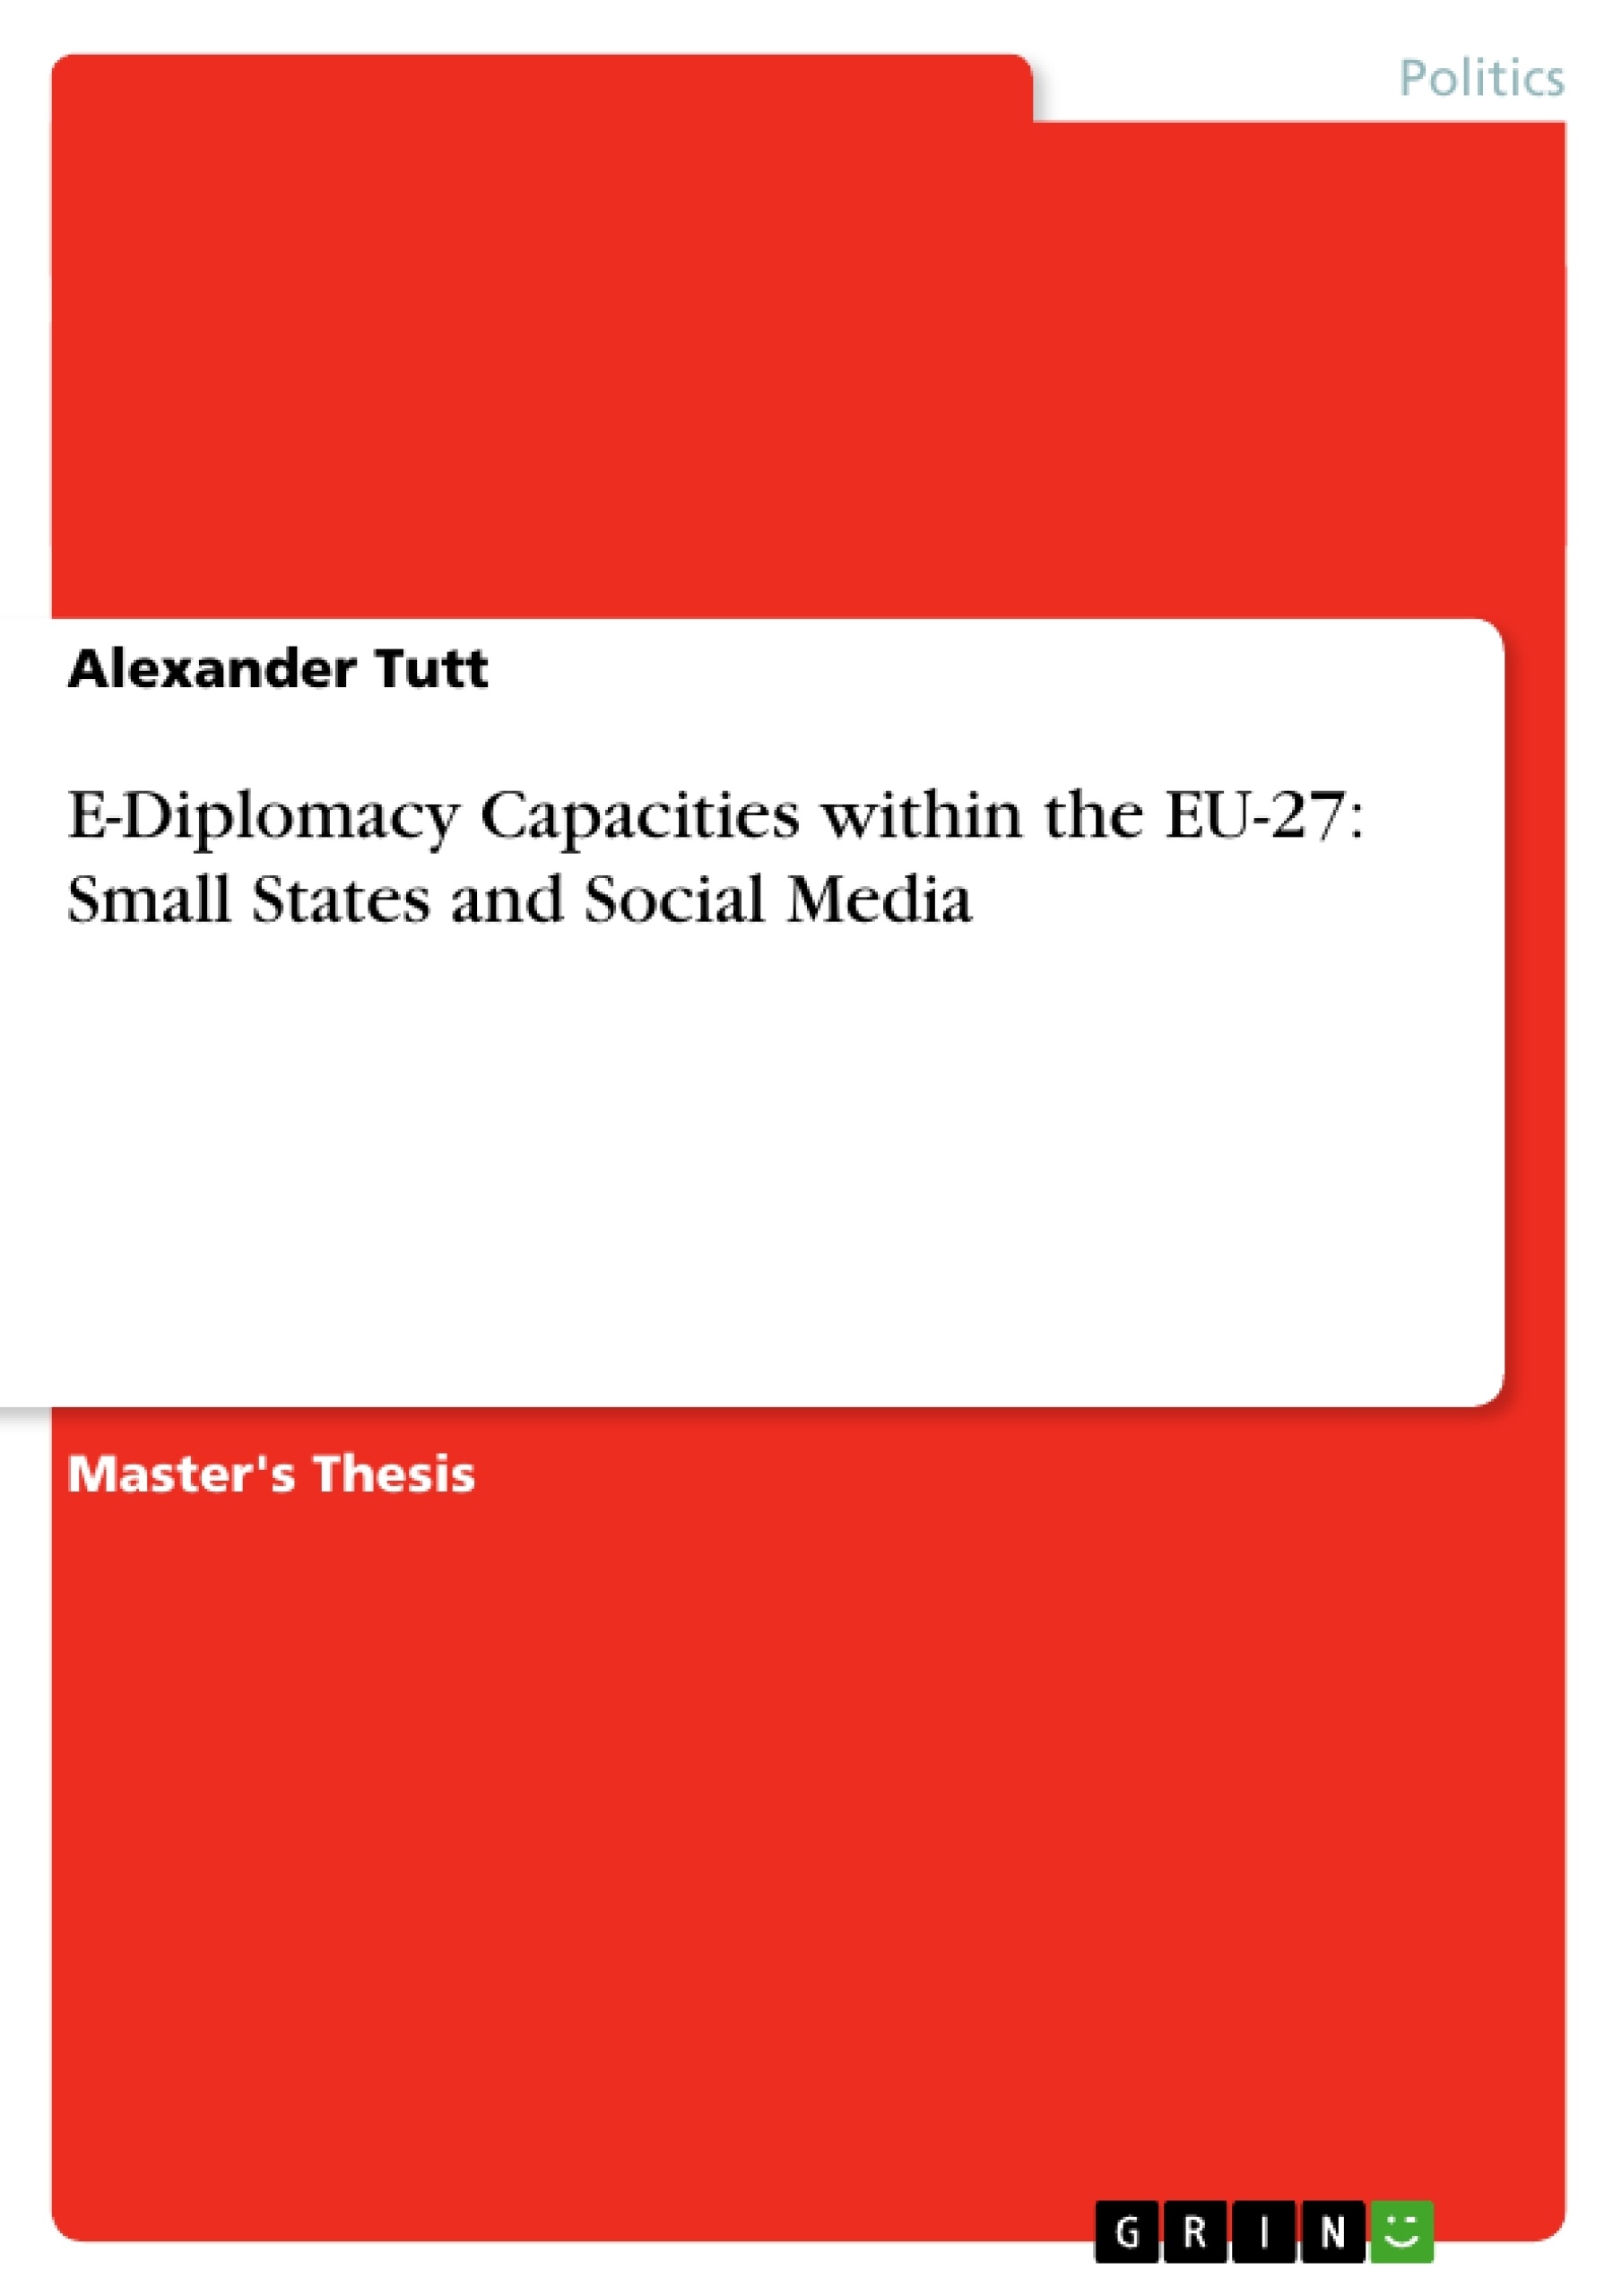 Título: E-Diplomacy Capacities within the EU-27: Small States and Social Media